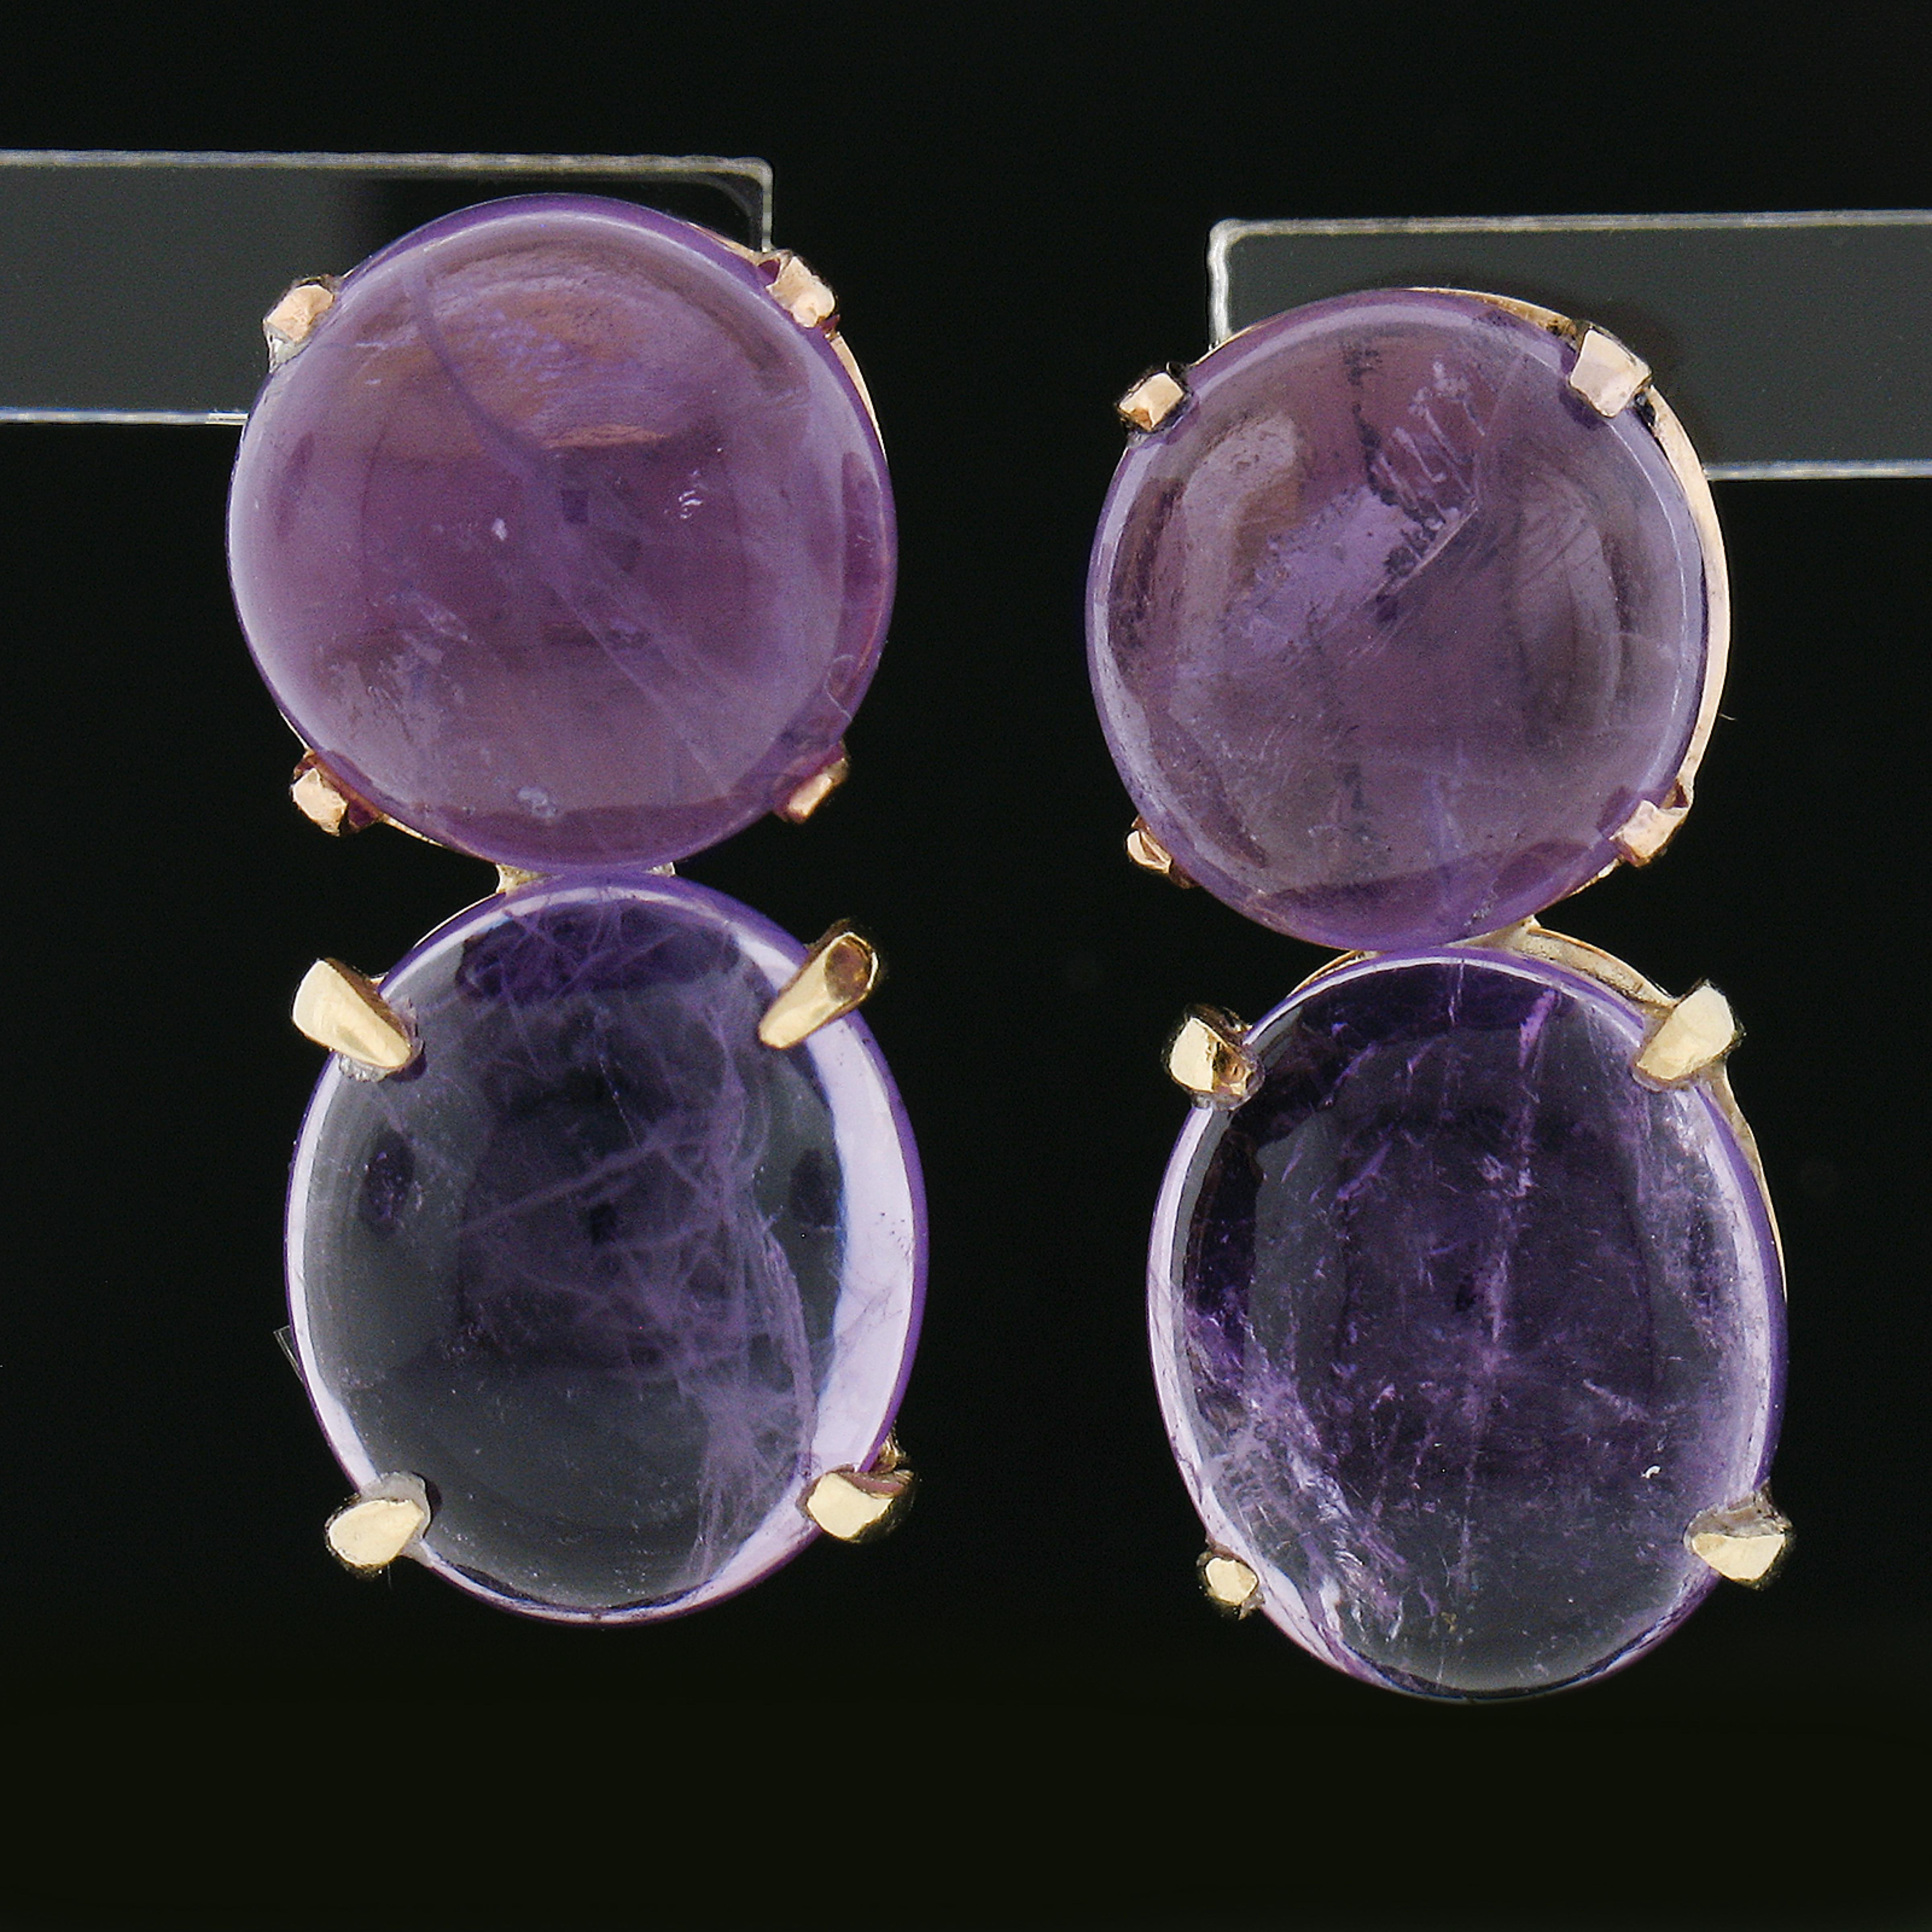 This vintage pair of dangle drop earrings are crafted from solid 14k yellow gold and feature a bold design. The earrings have 2 round cabochon & 2 oval cabochon cut amethyst stones that are neatly prong set. Enjoy!

--Stone(s):--
(2) Natural Genuine